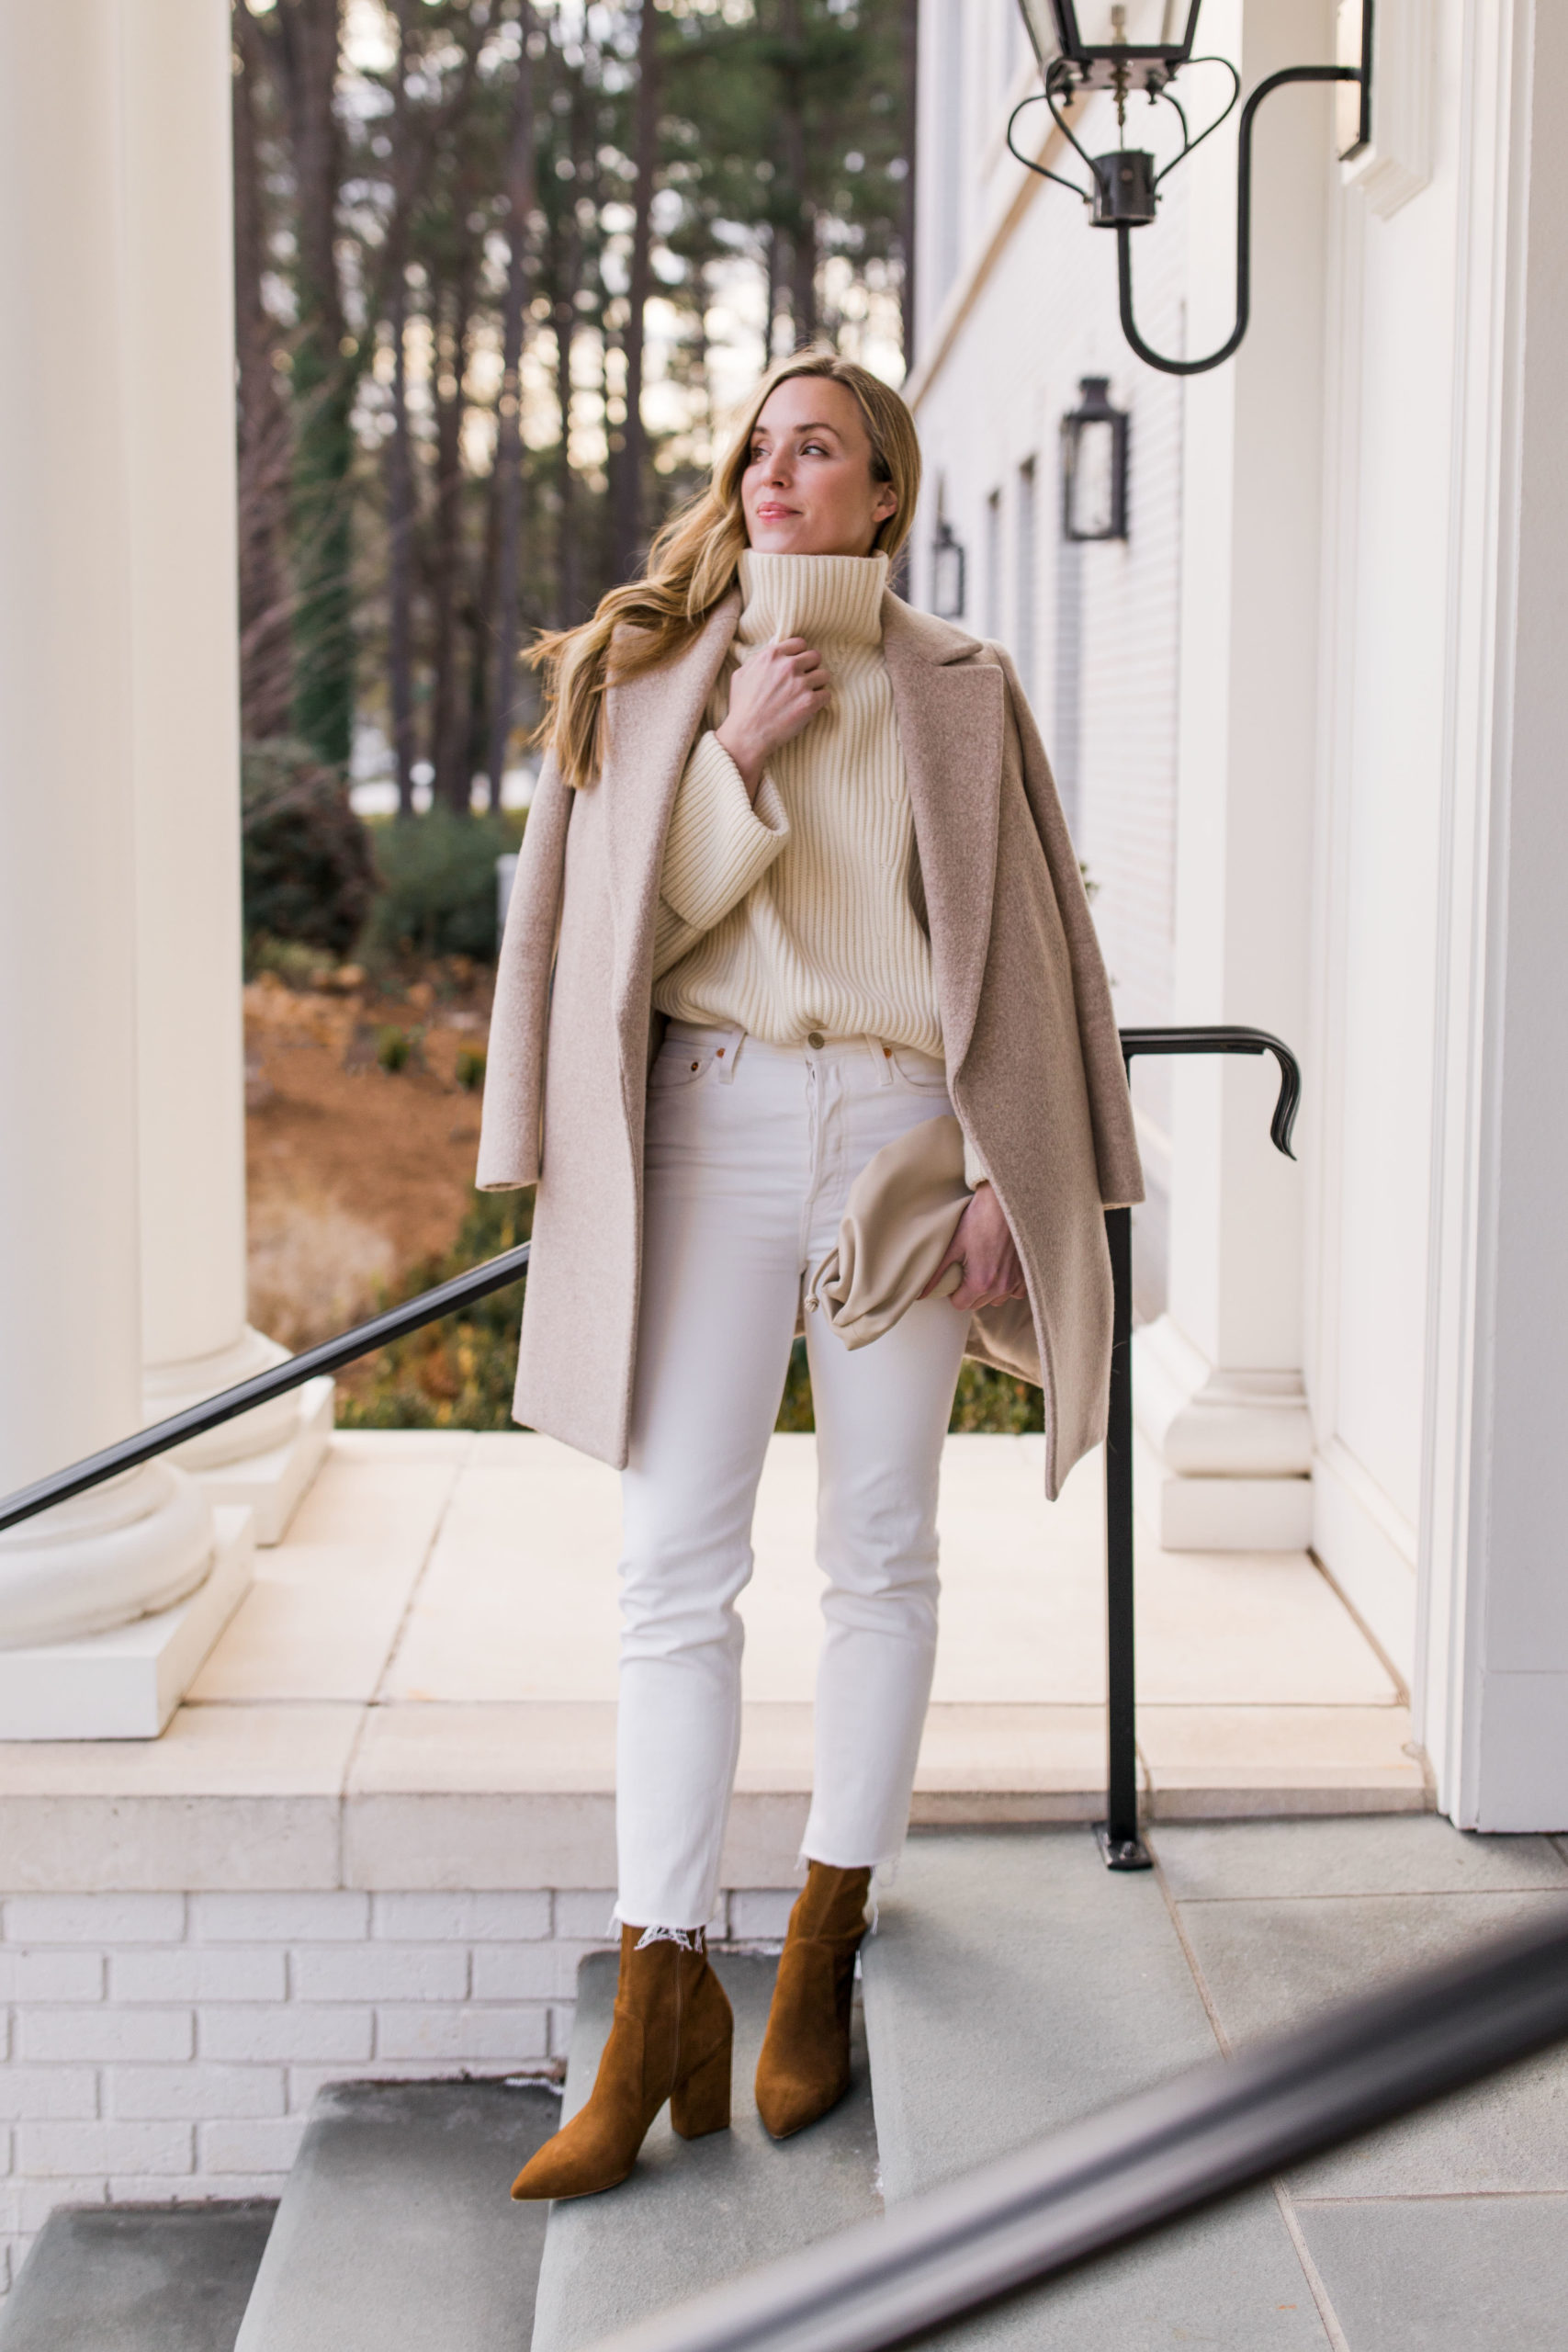 How to Wear White Jeans in 8 Outfit Ideas Natalie